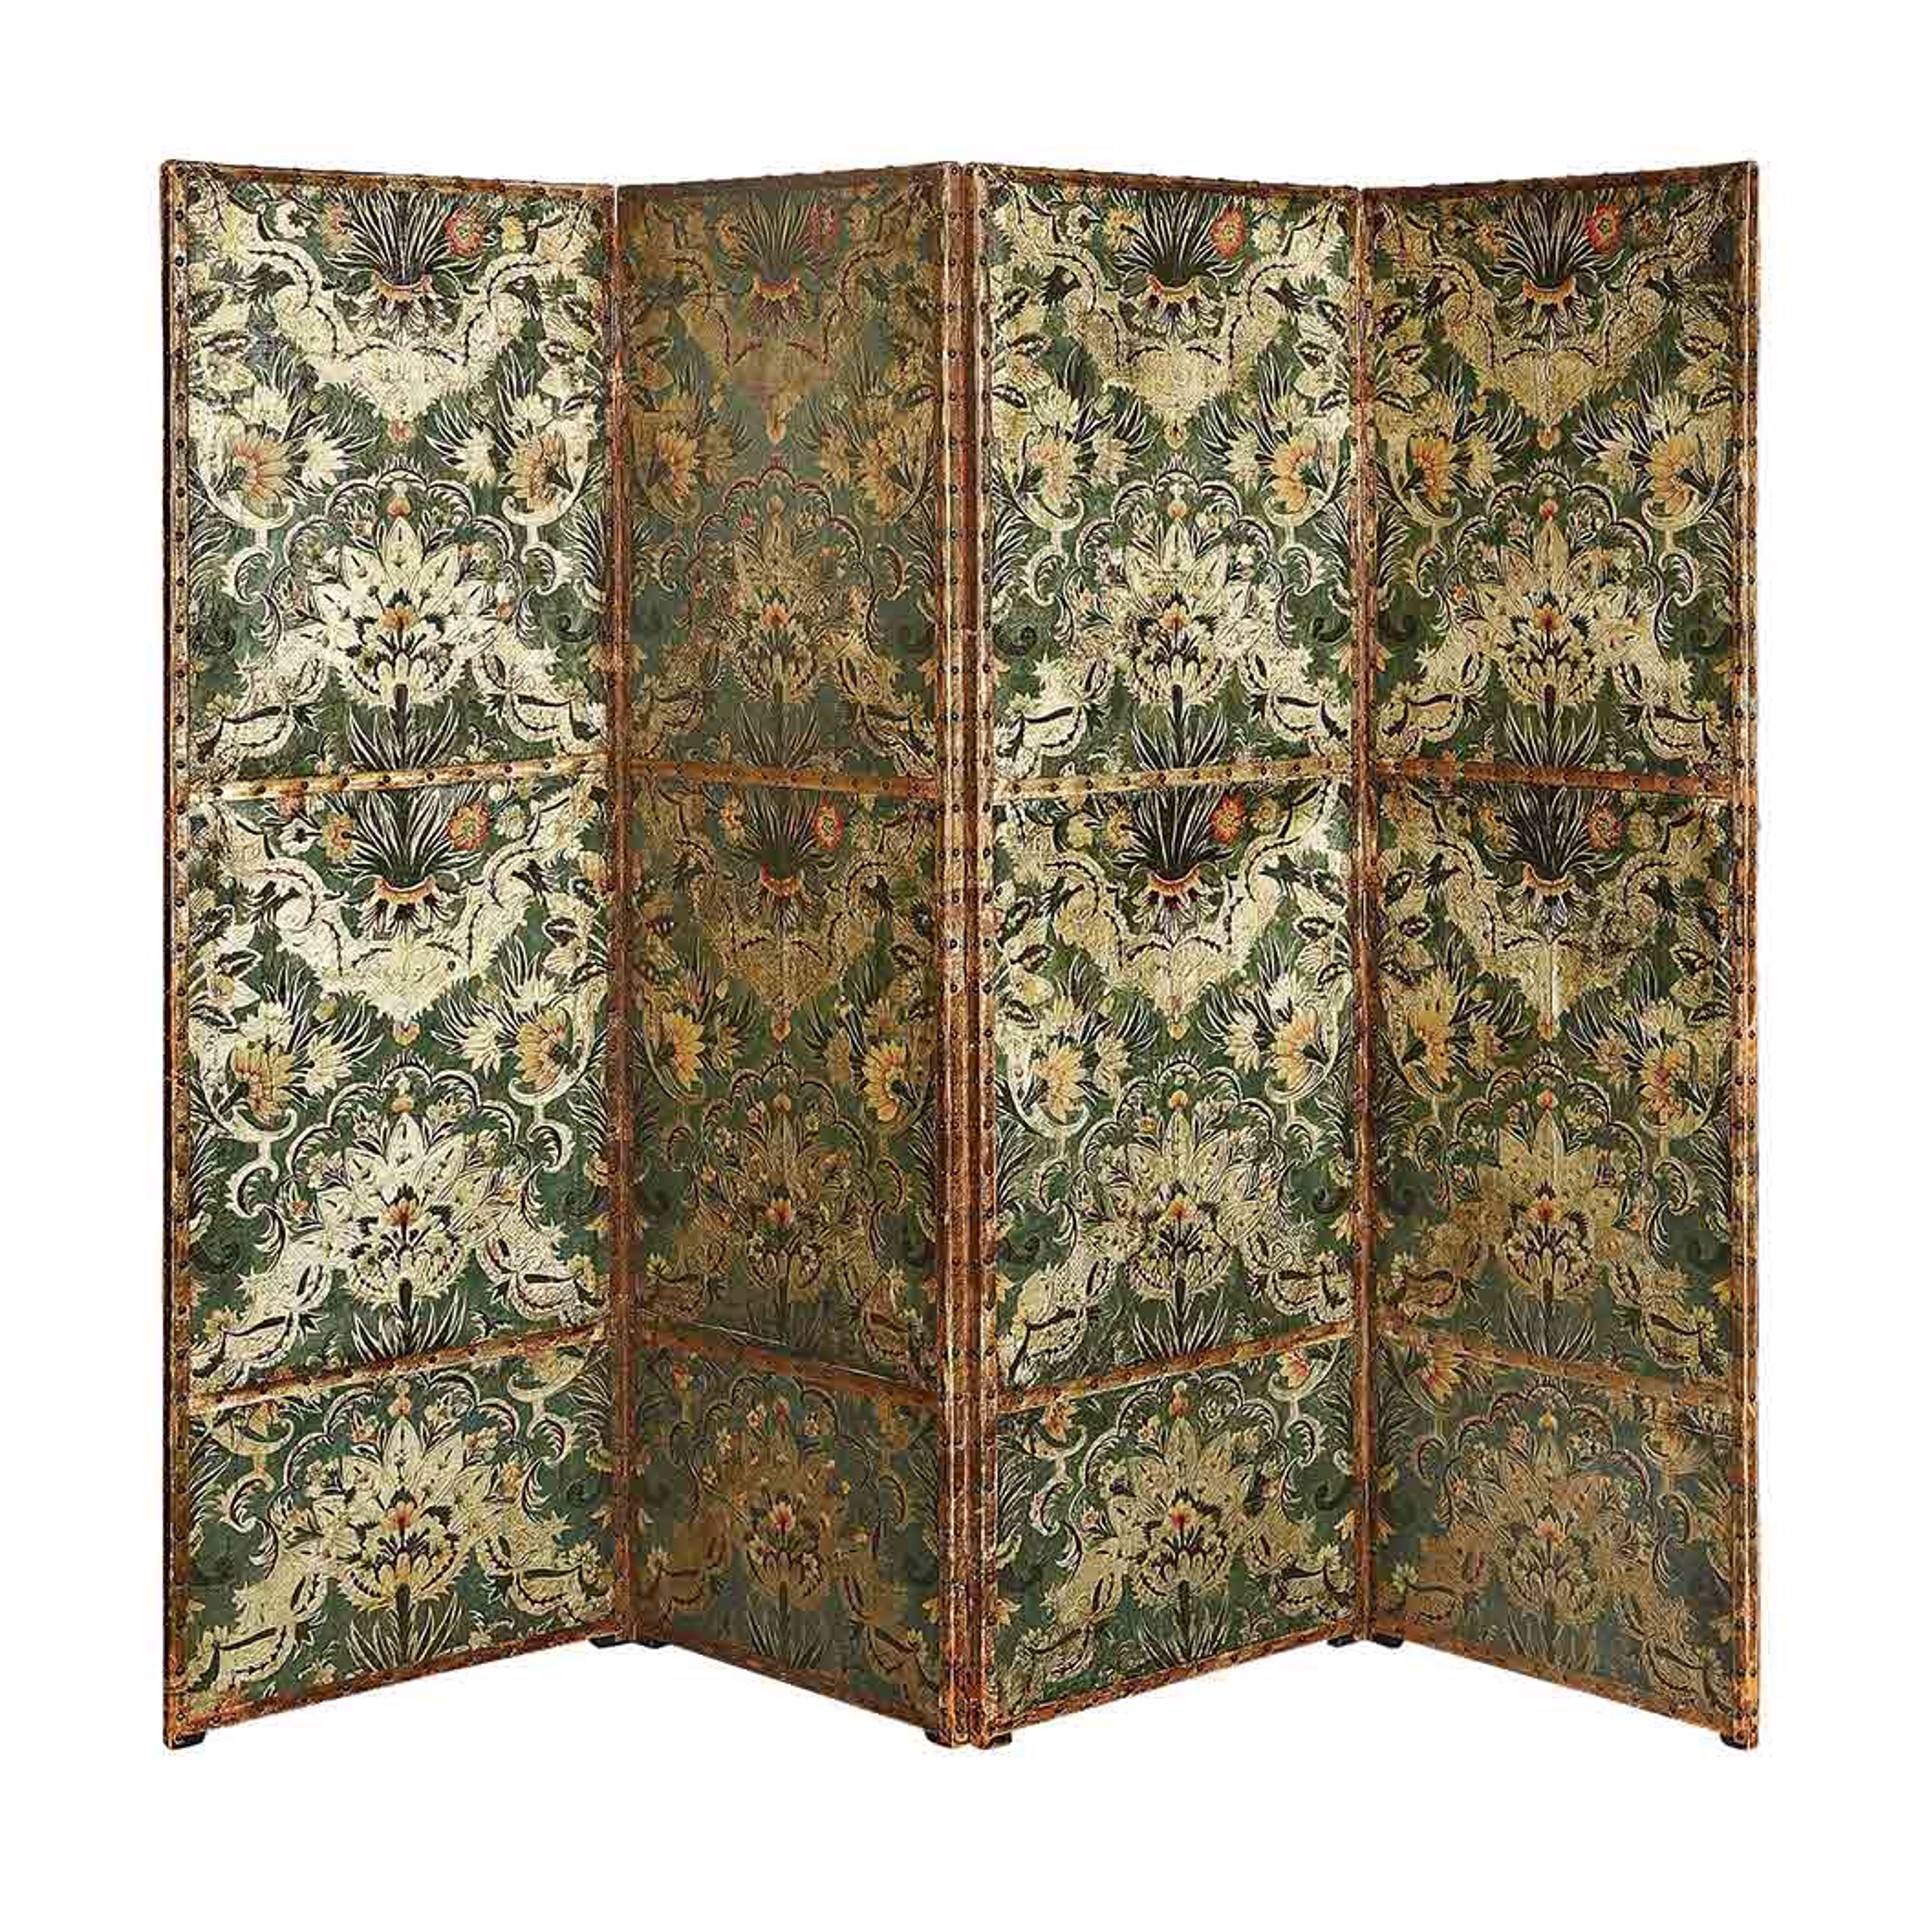 PAINTED LEATHER FOUR-PANEL SCREEN